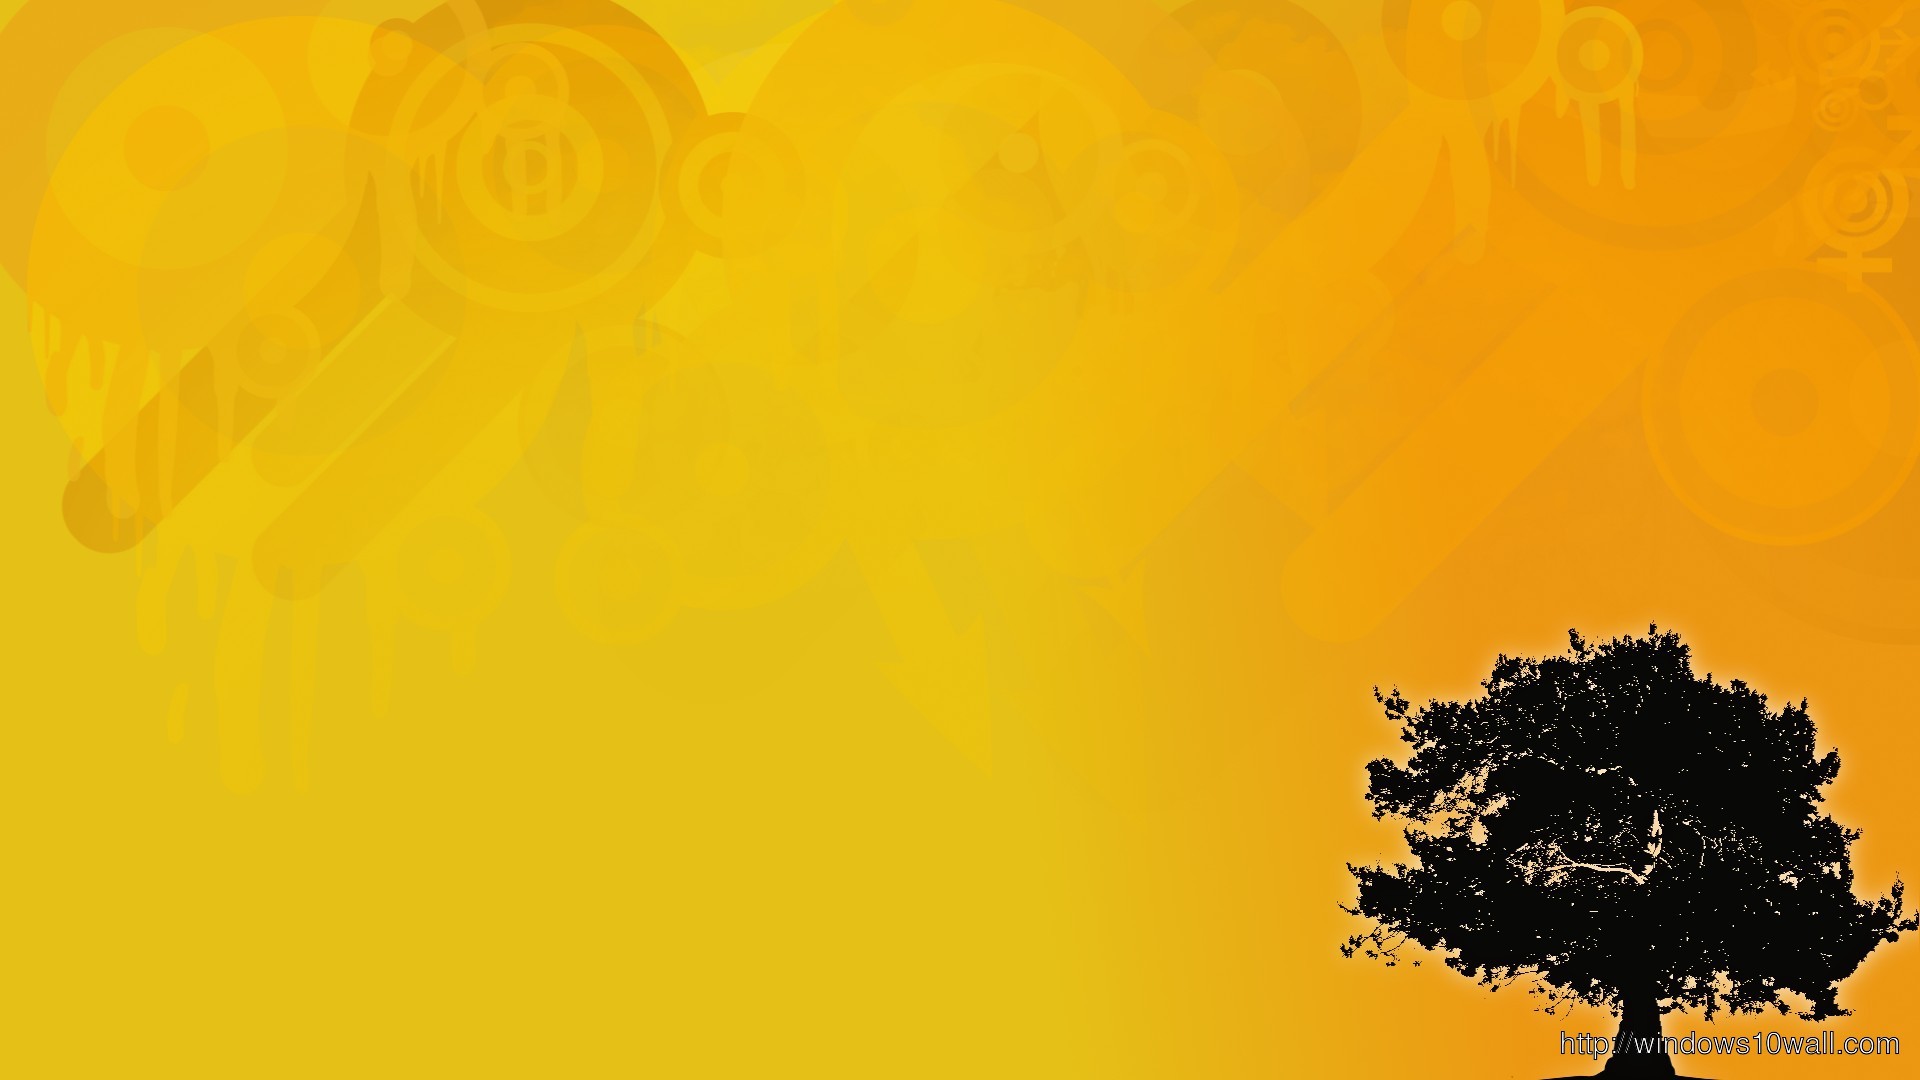 1920x1080 Cool Orange With Tree Background Wallpaper